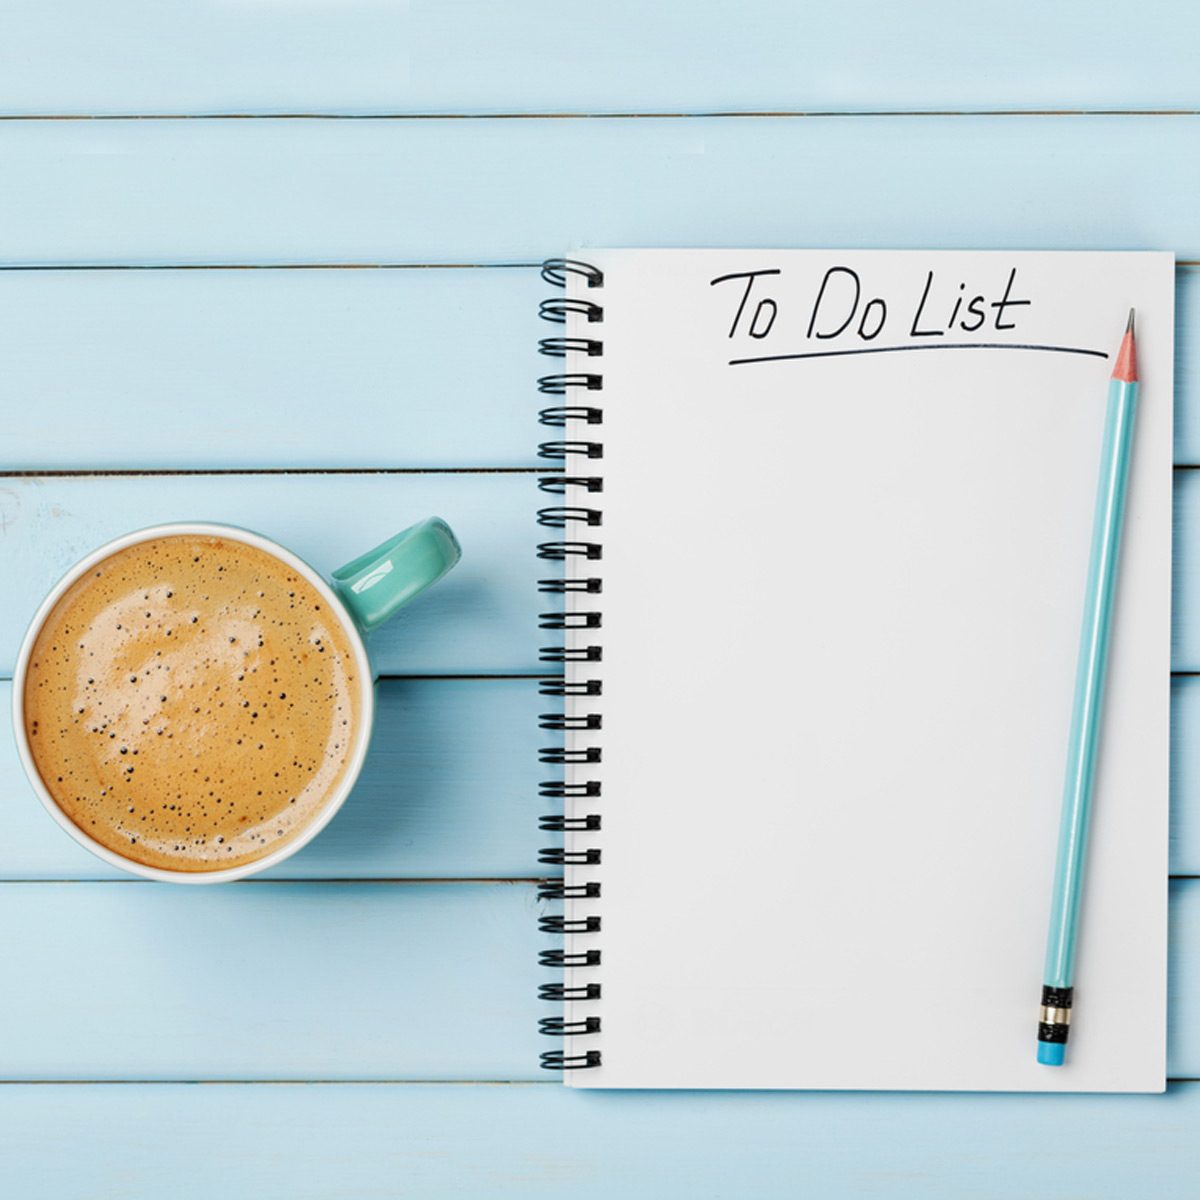 shutterstock_384639760 to do list with coffee late paper pencil notebook